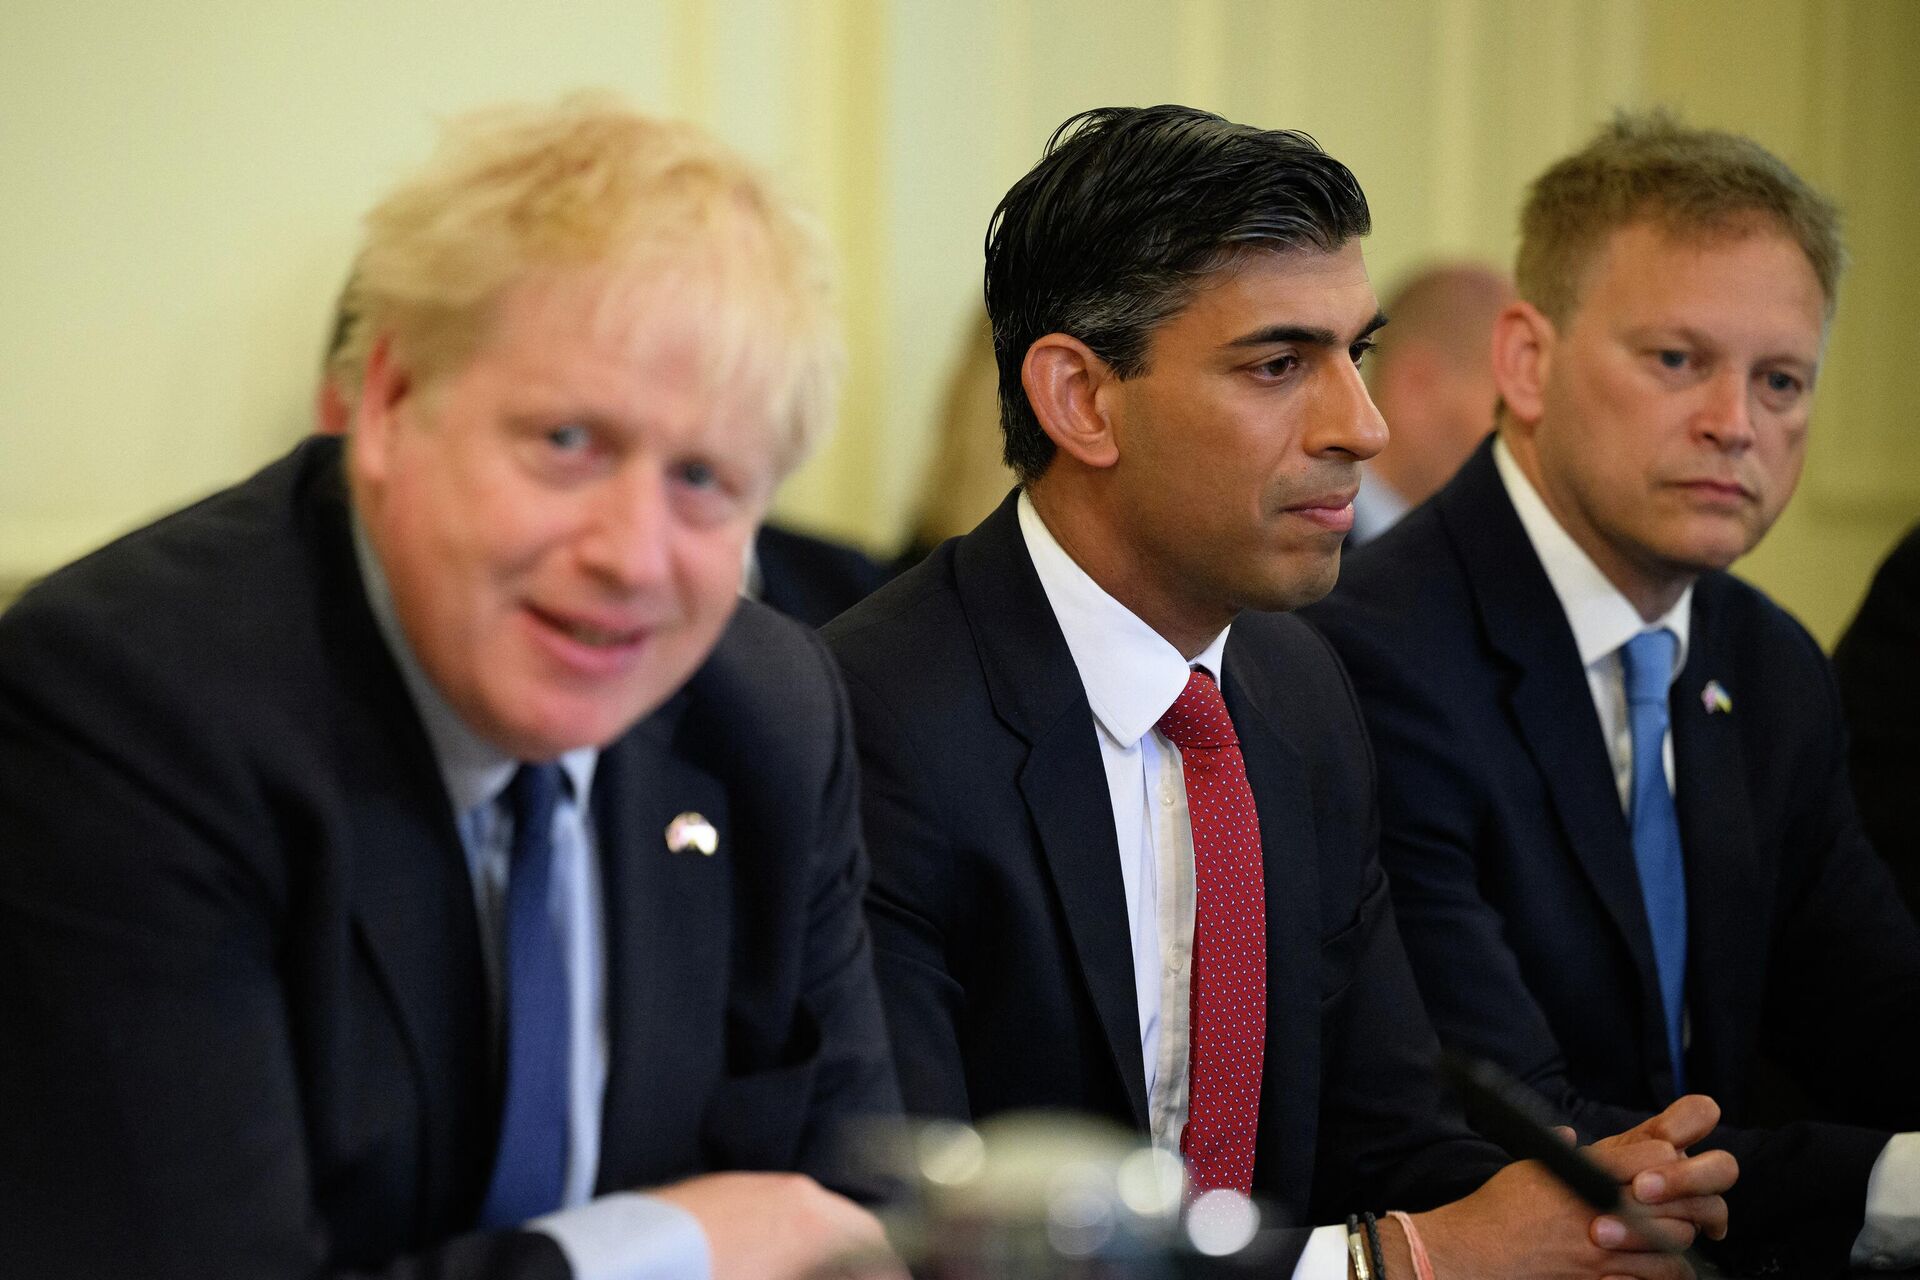 (From L) Britain's Prime Minister Boris Johnson, Britain's Chancellor of the Exchequer Rishi Sunak and Britain's Transport Secretary Grant Shapps attend a Cabinet meeting at 10 Downing Street, in London, on June 7, 2022 - Sputnik International, 1920, 23.10.2022